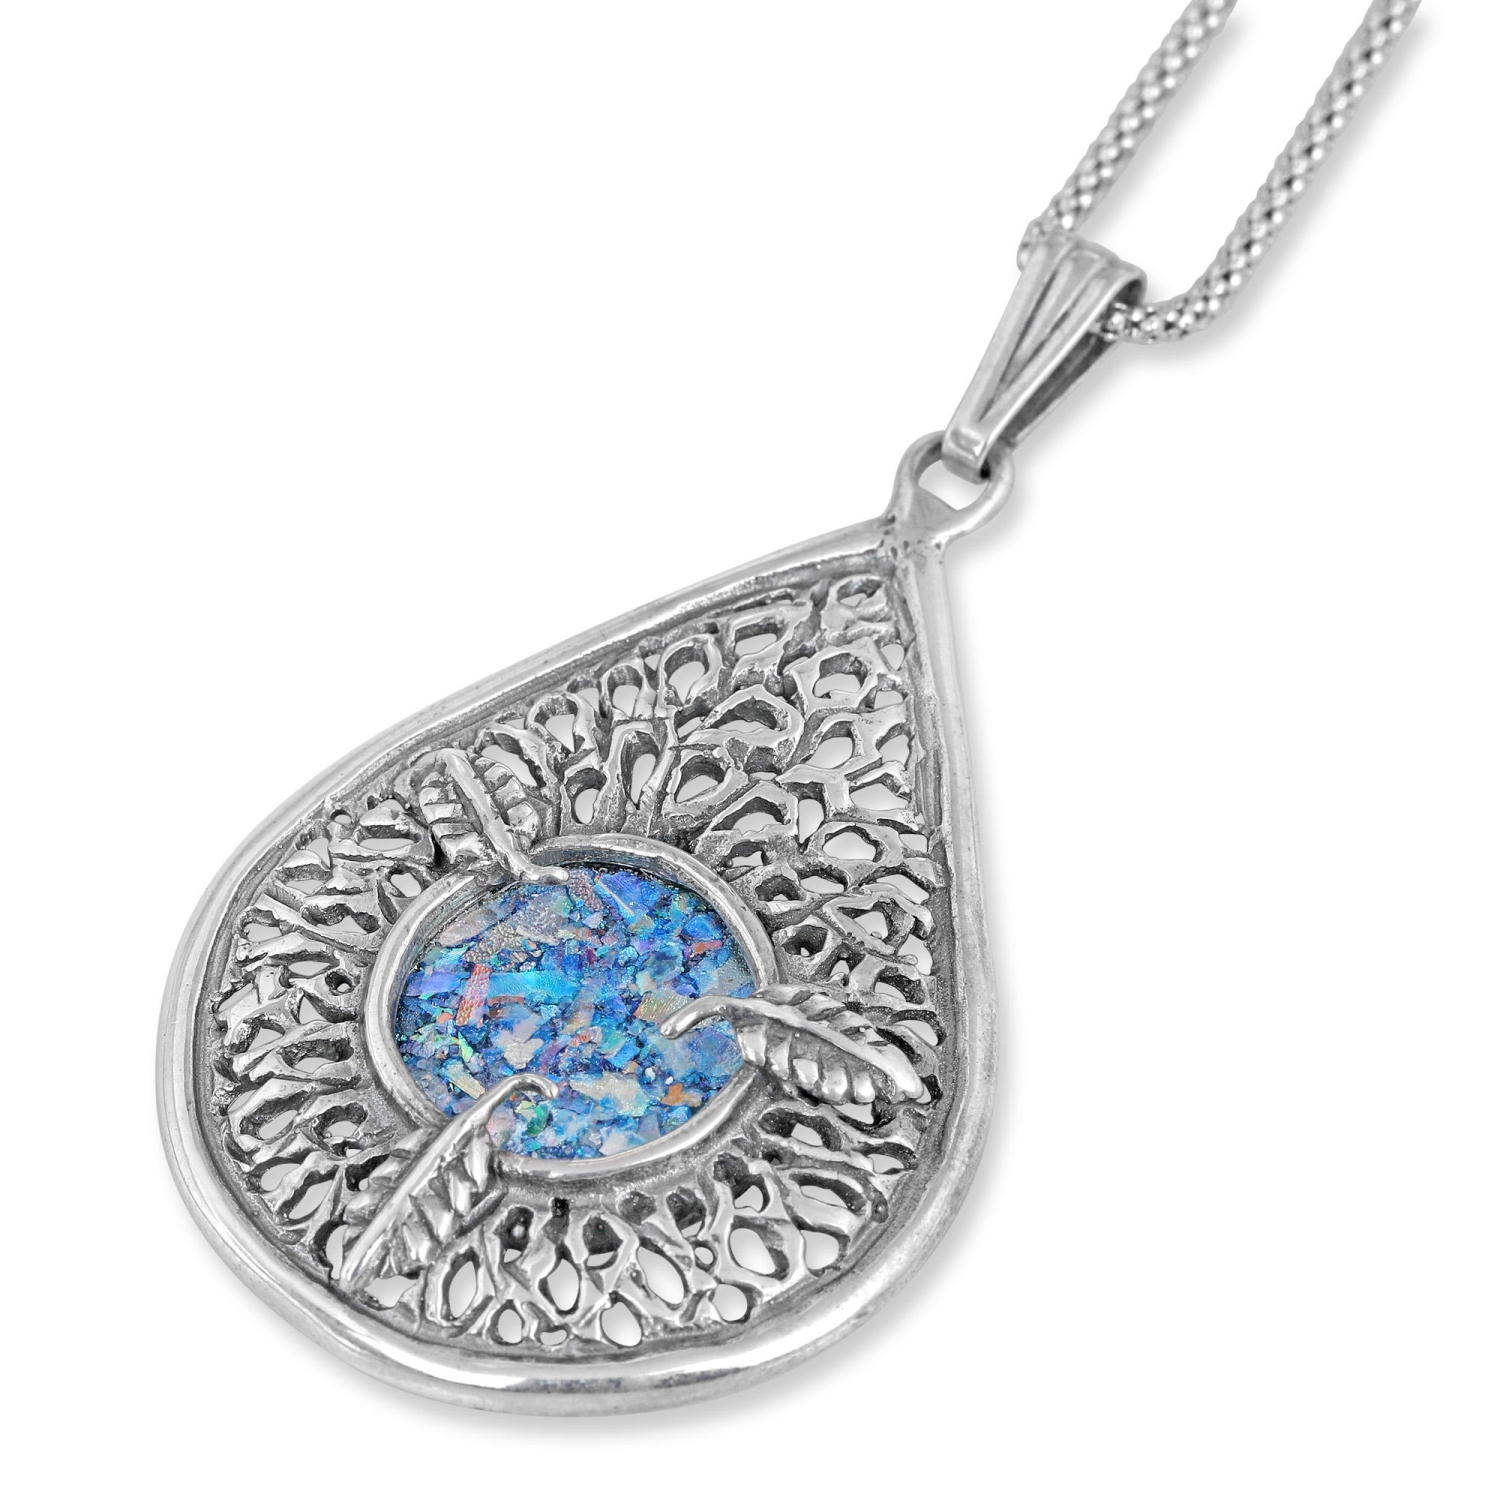 Sterling Silver Filigree Teardrop Roman Glass Necklace with Leaves - 1